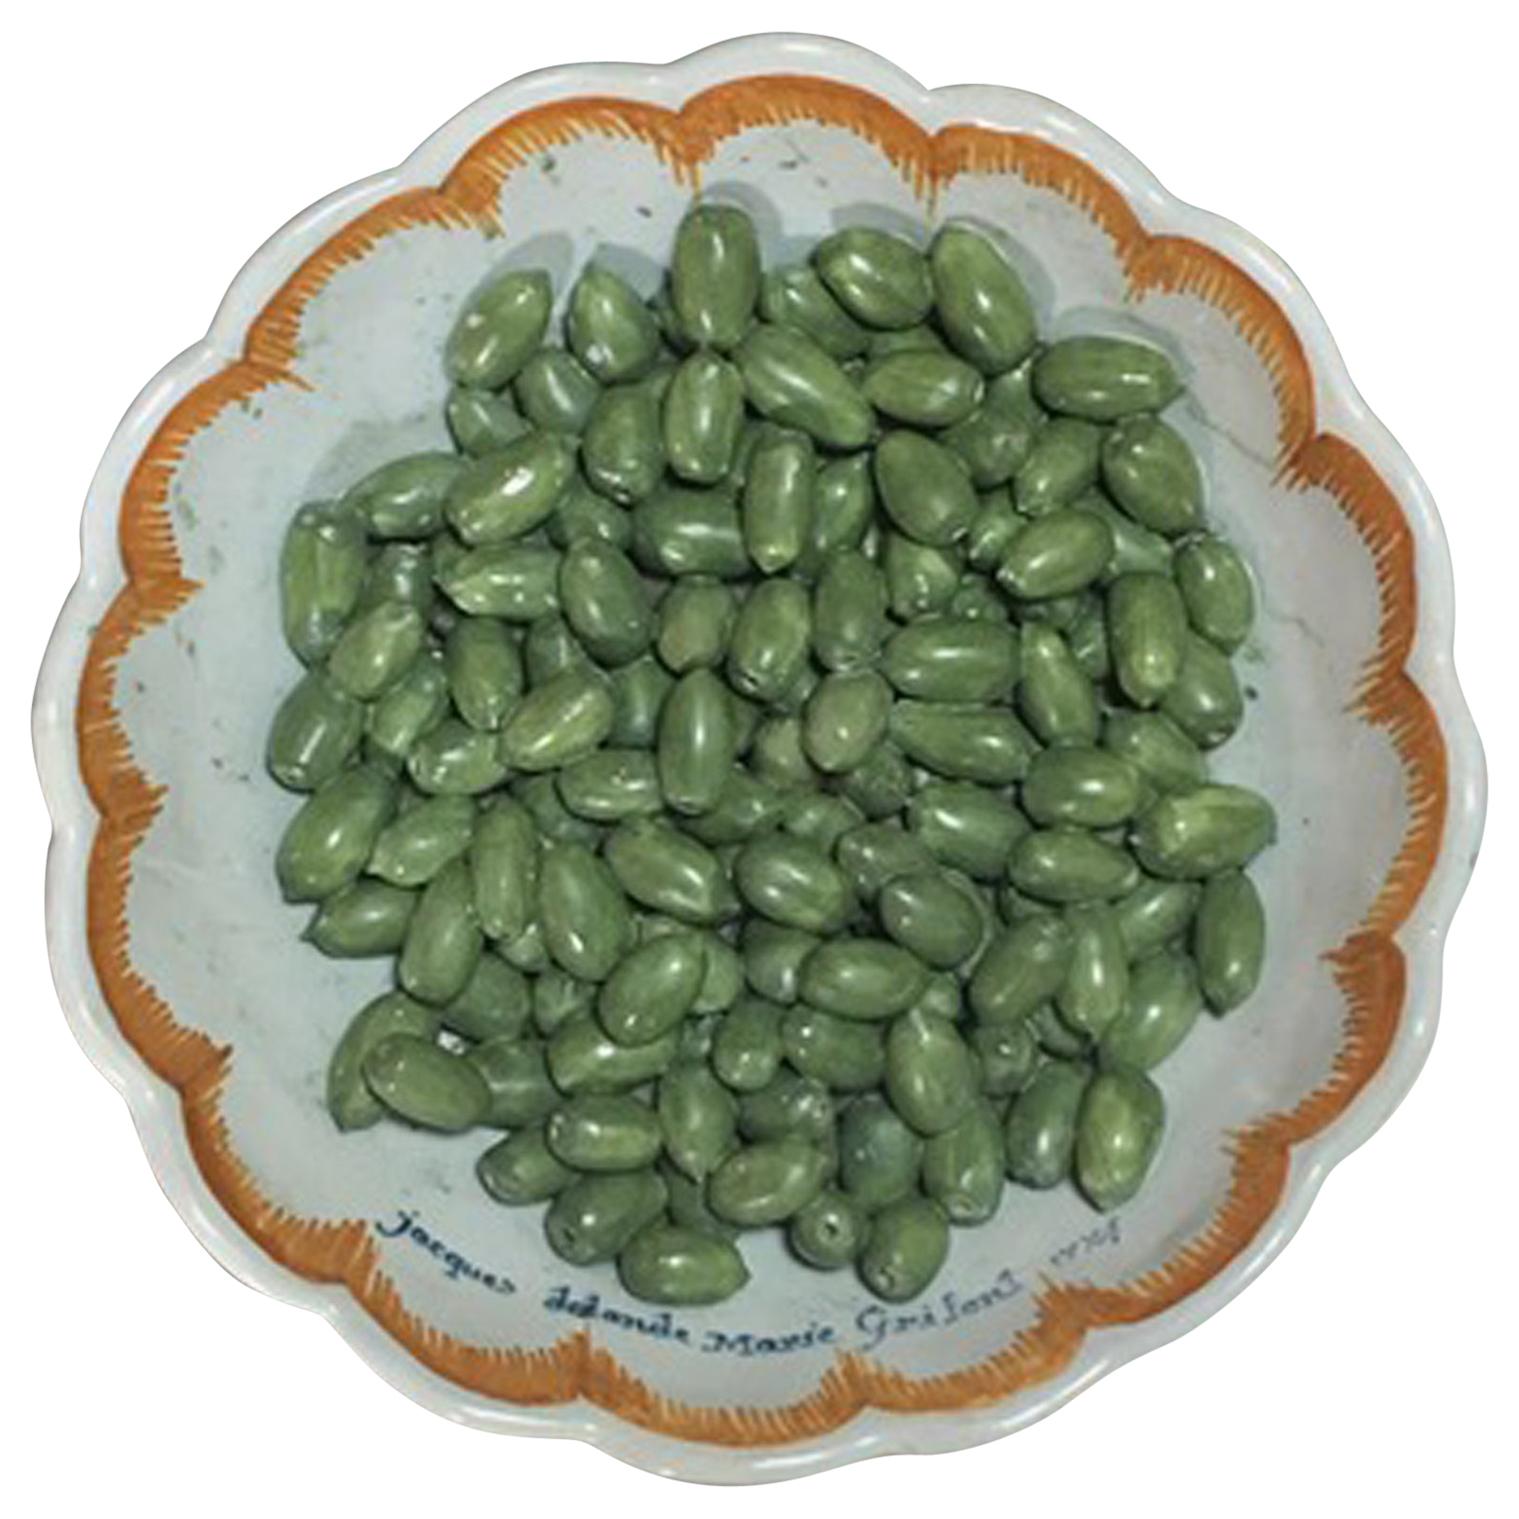 French Faience Tromp L'oeil Bowl with Olives, Nevers, Dated 1774